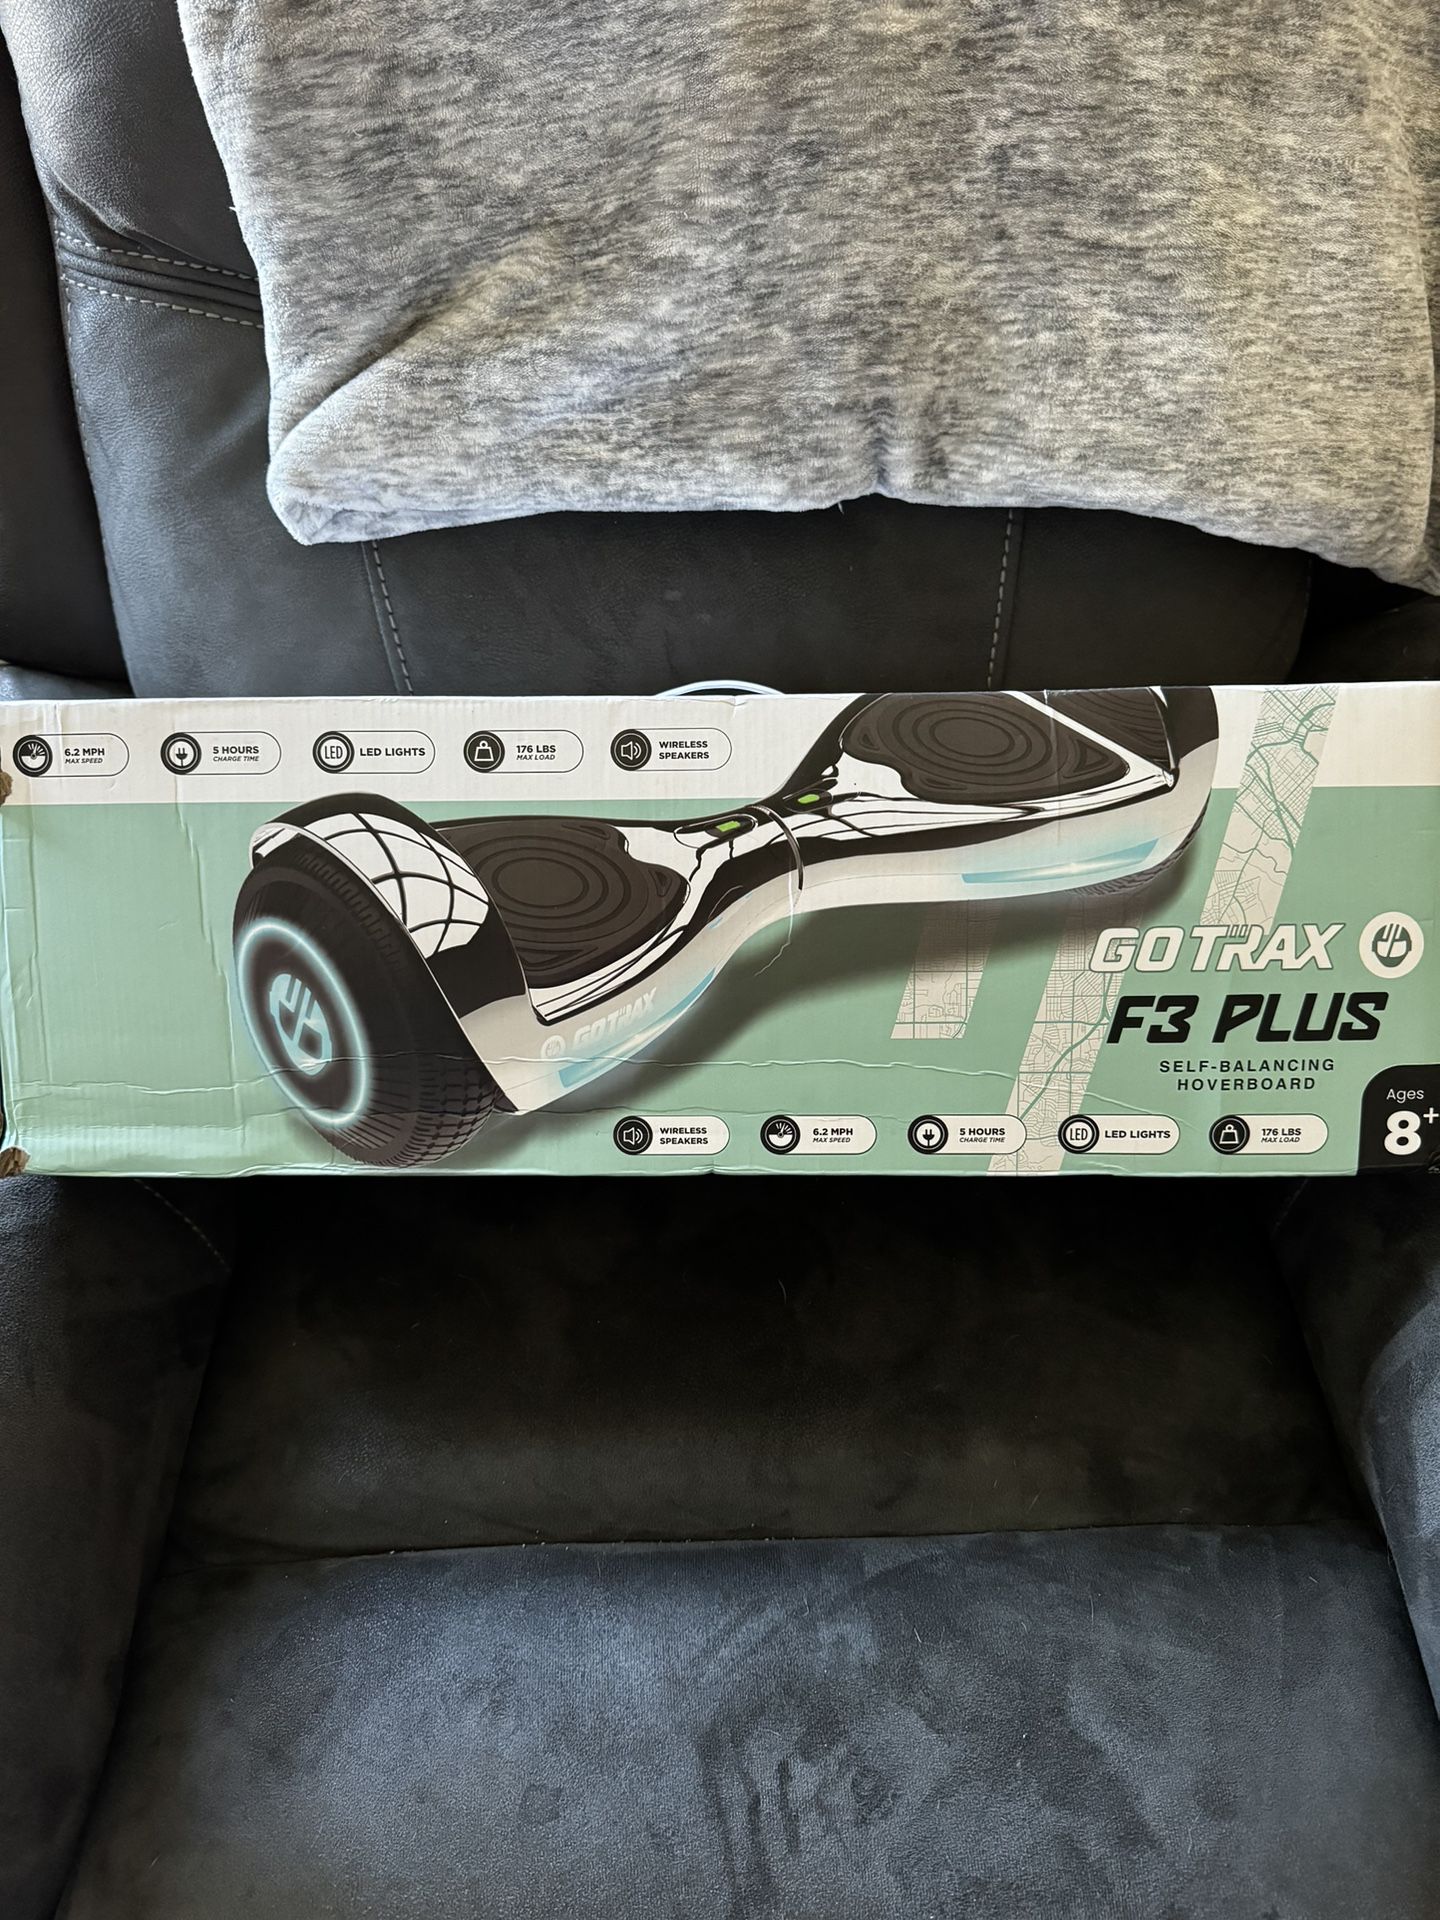 NEW sealed GoTrax F3 Plus Self Balancing Hoverboard Chrome